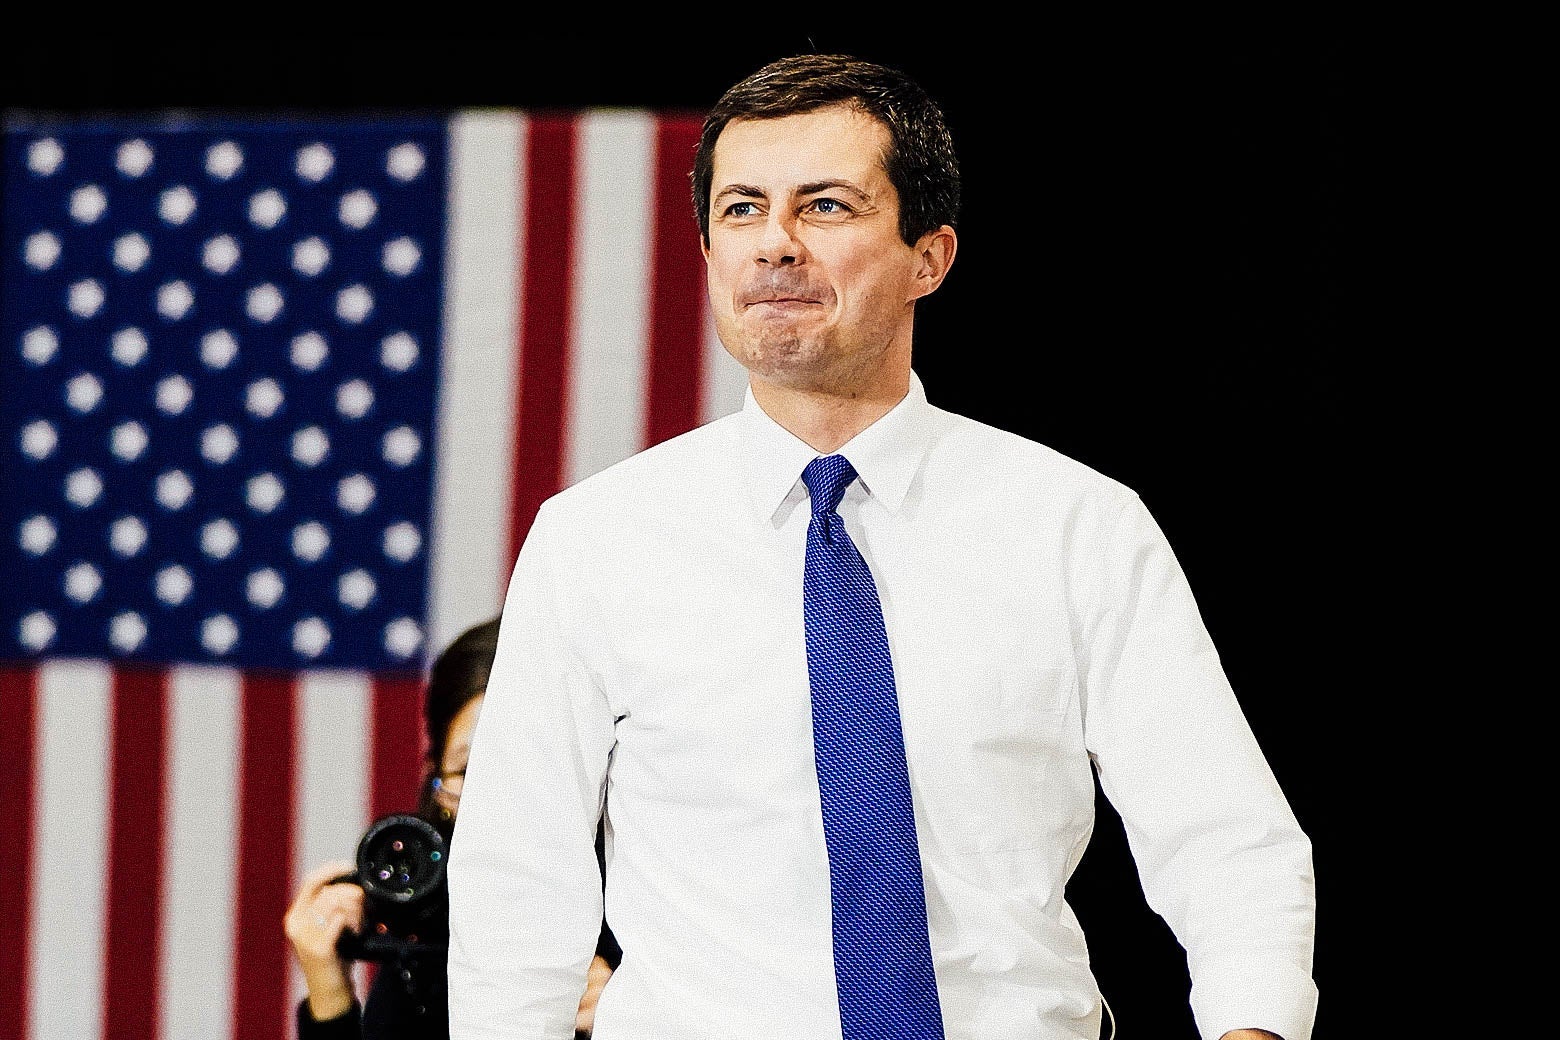 Buttigieg smiling as he walks, with an American flag in the background.